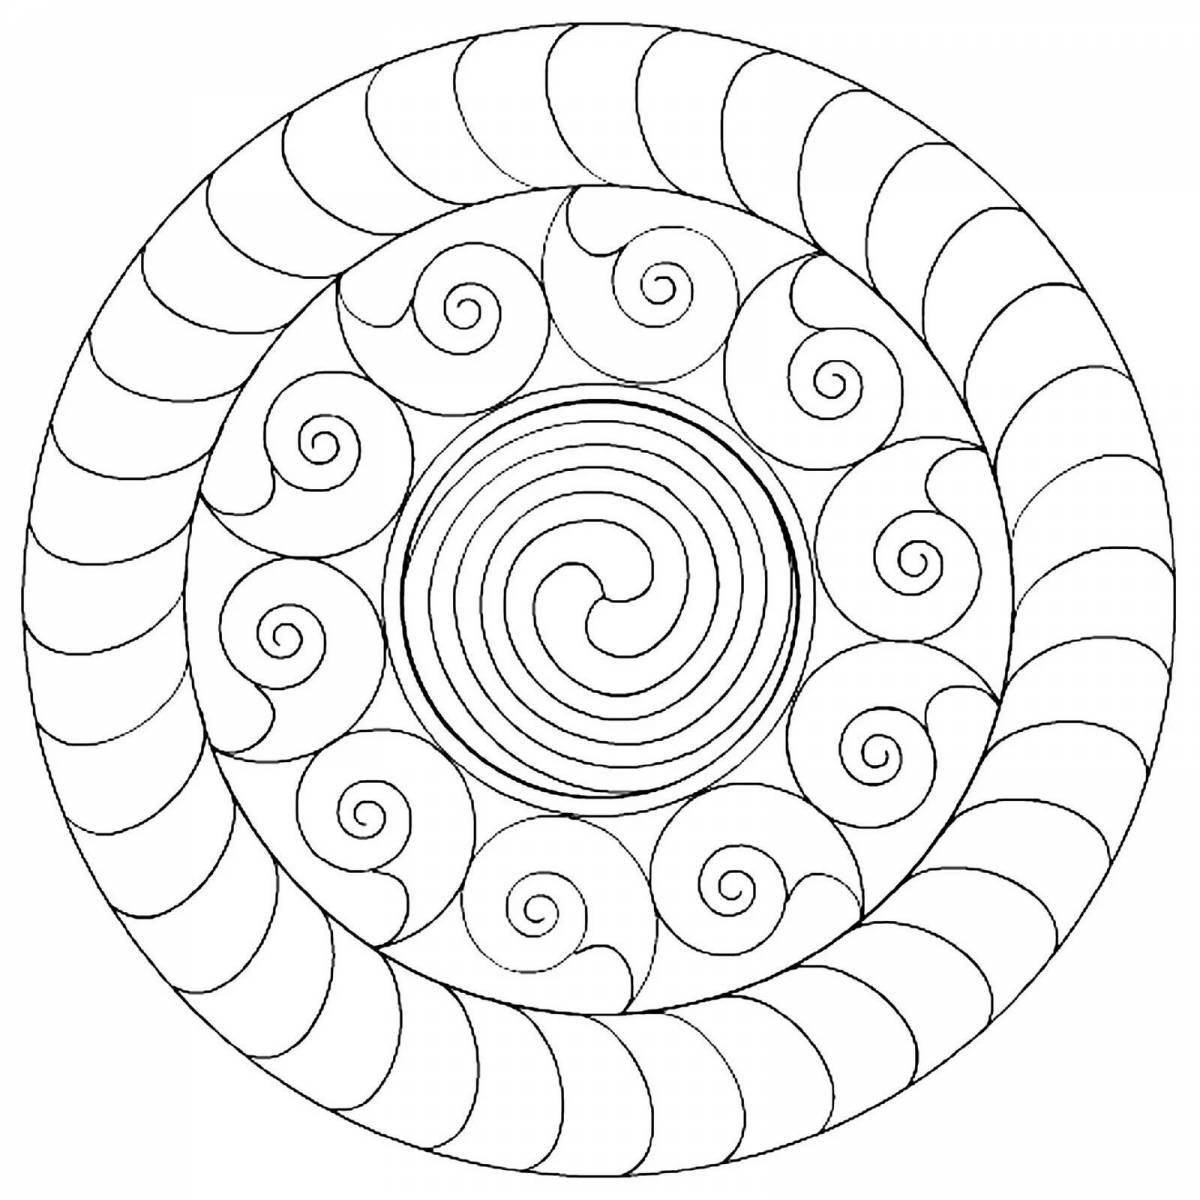 Animated spiral environment coloring page